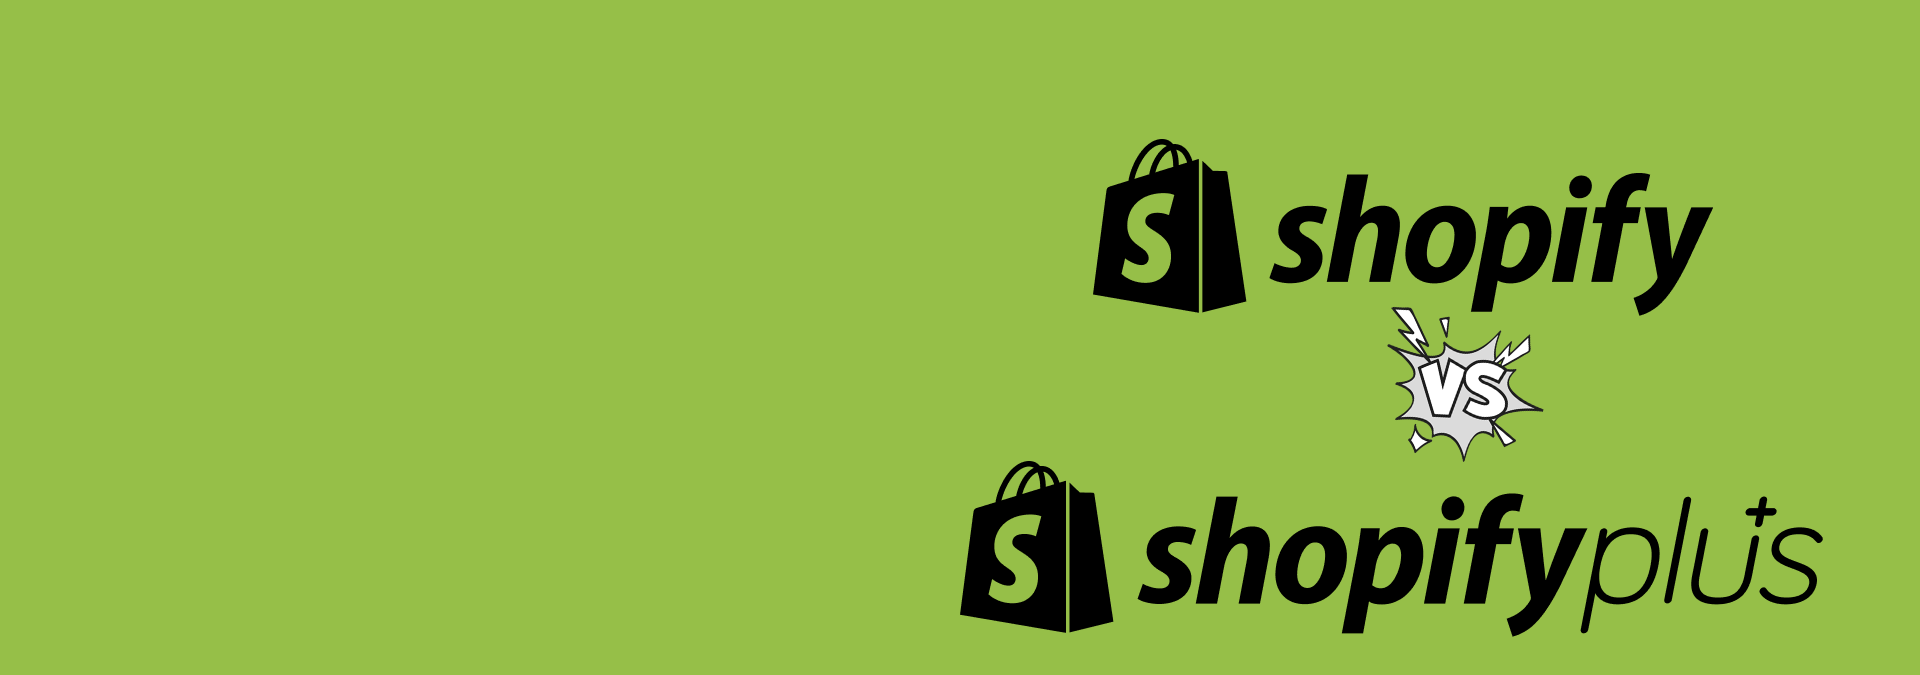 How to choose between Shopify and Shopify Plus?